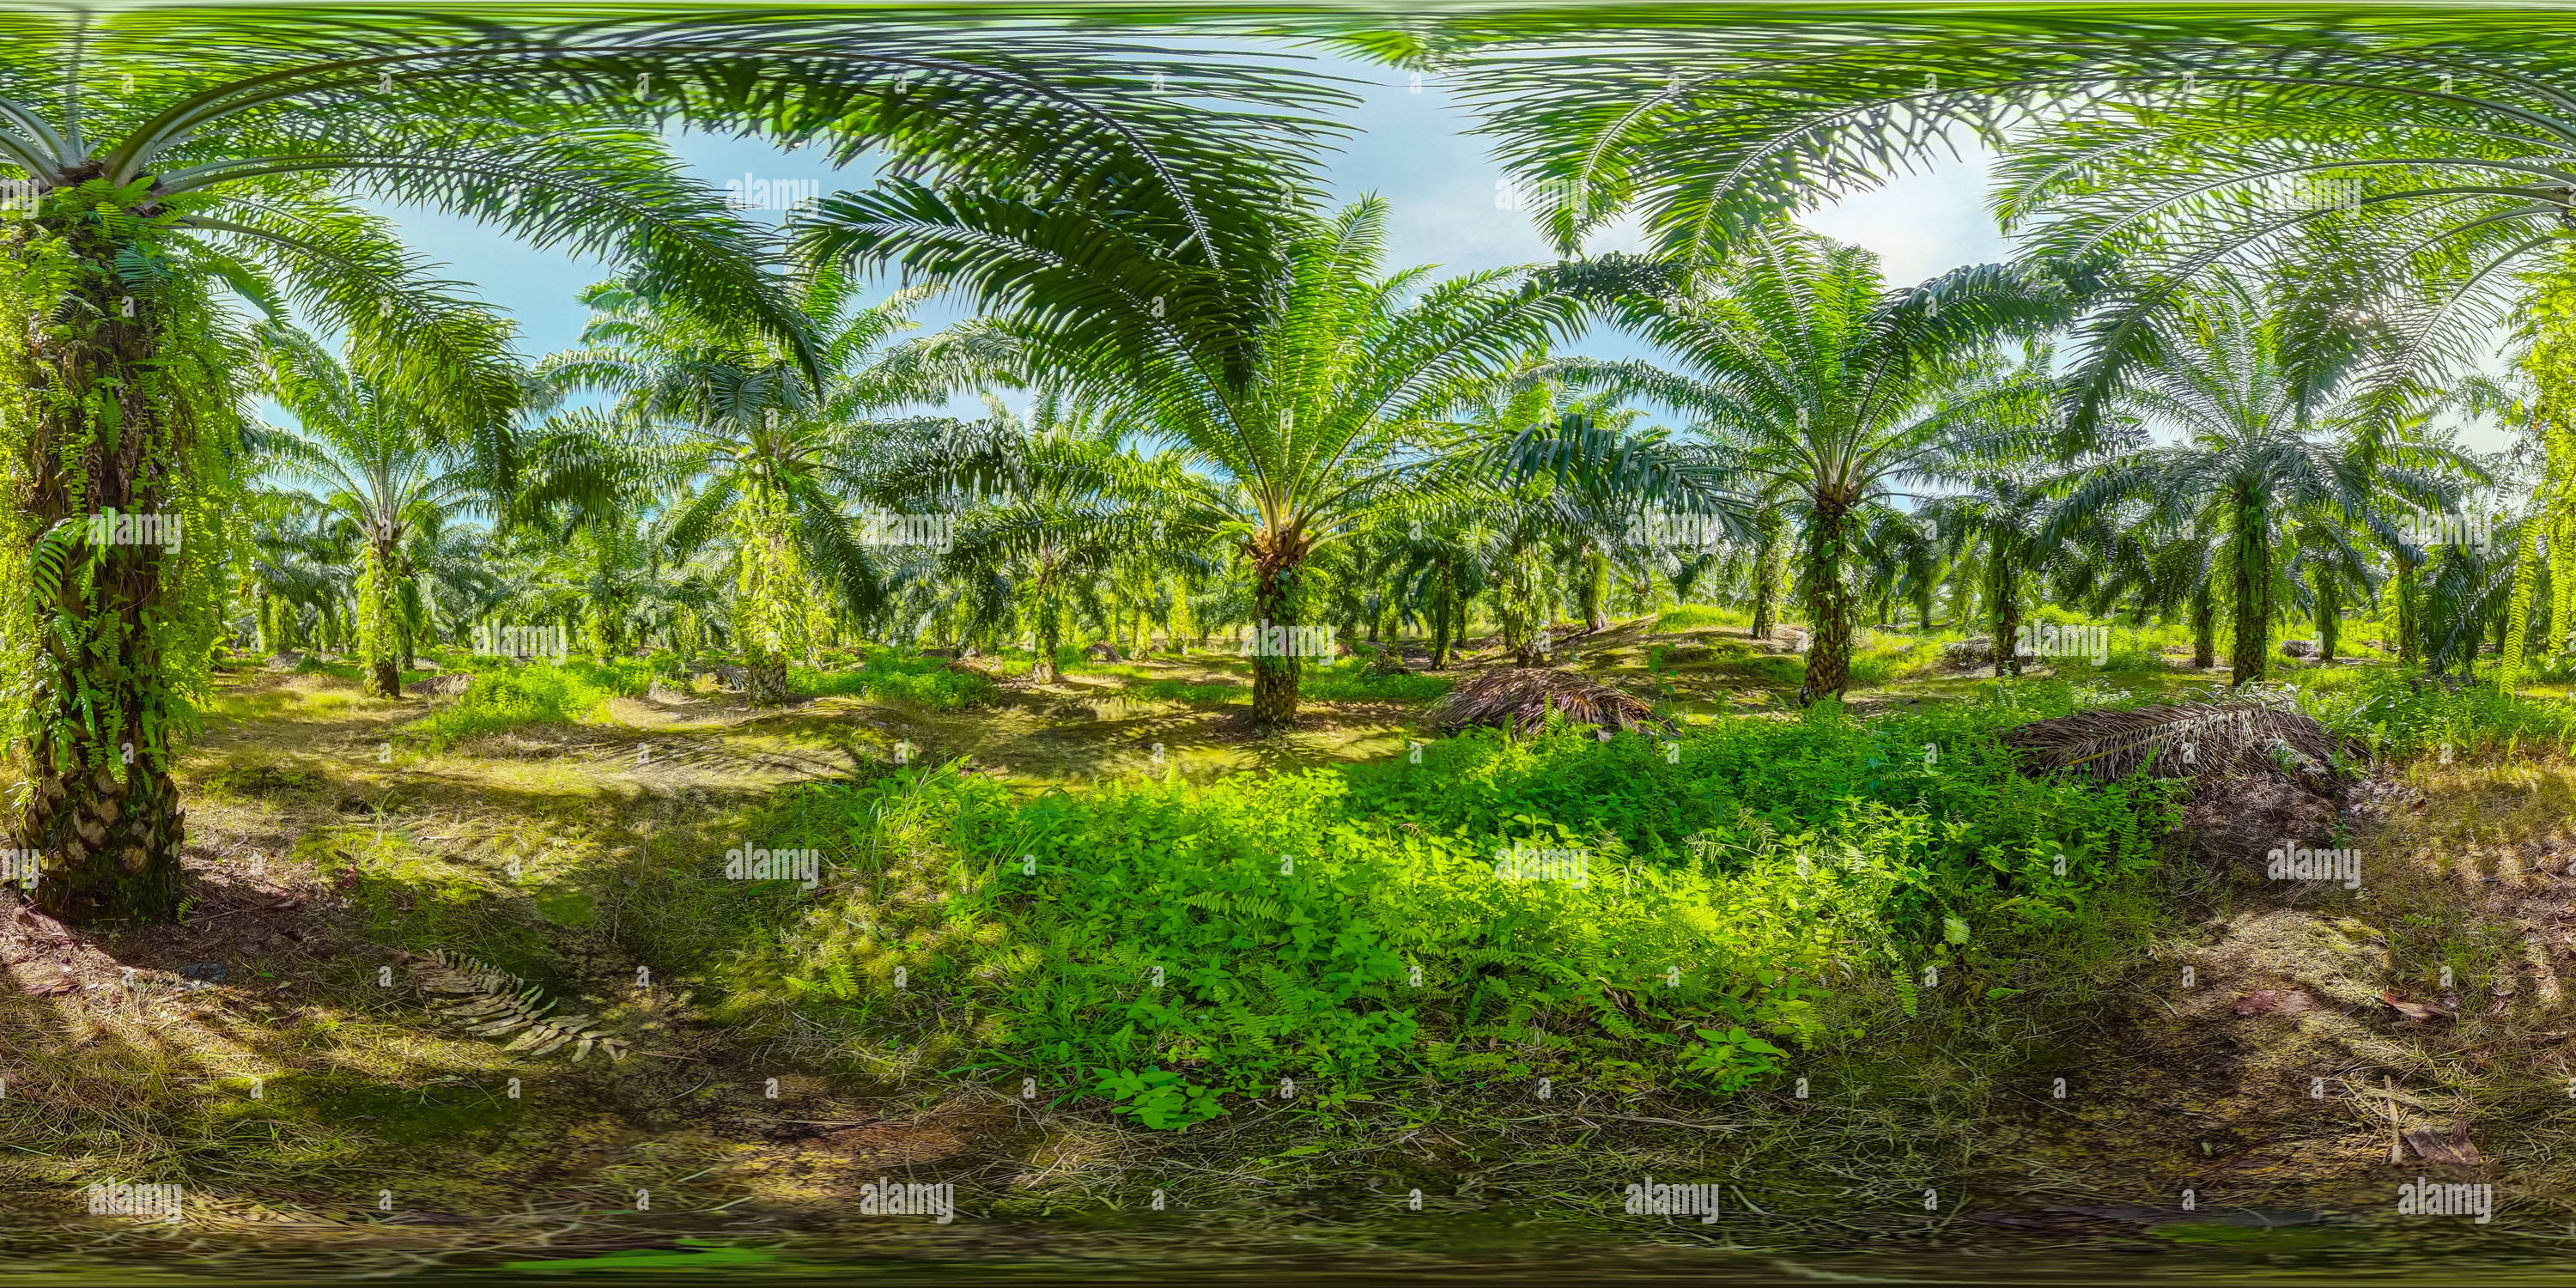 360 degree panoramic view of Oil palm plantations.